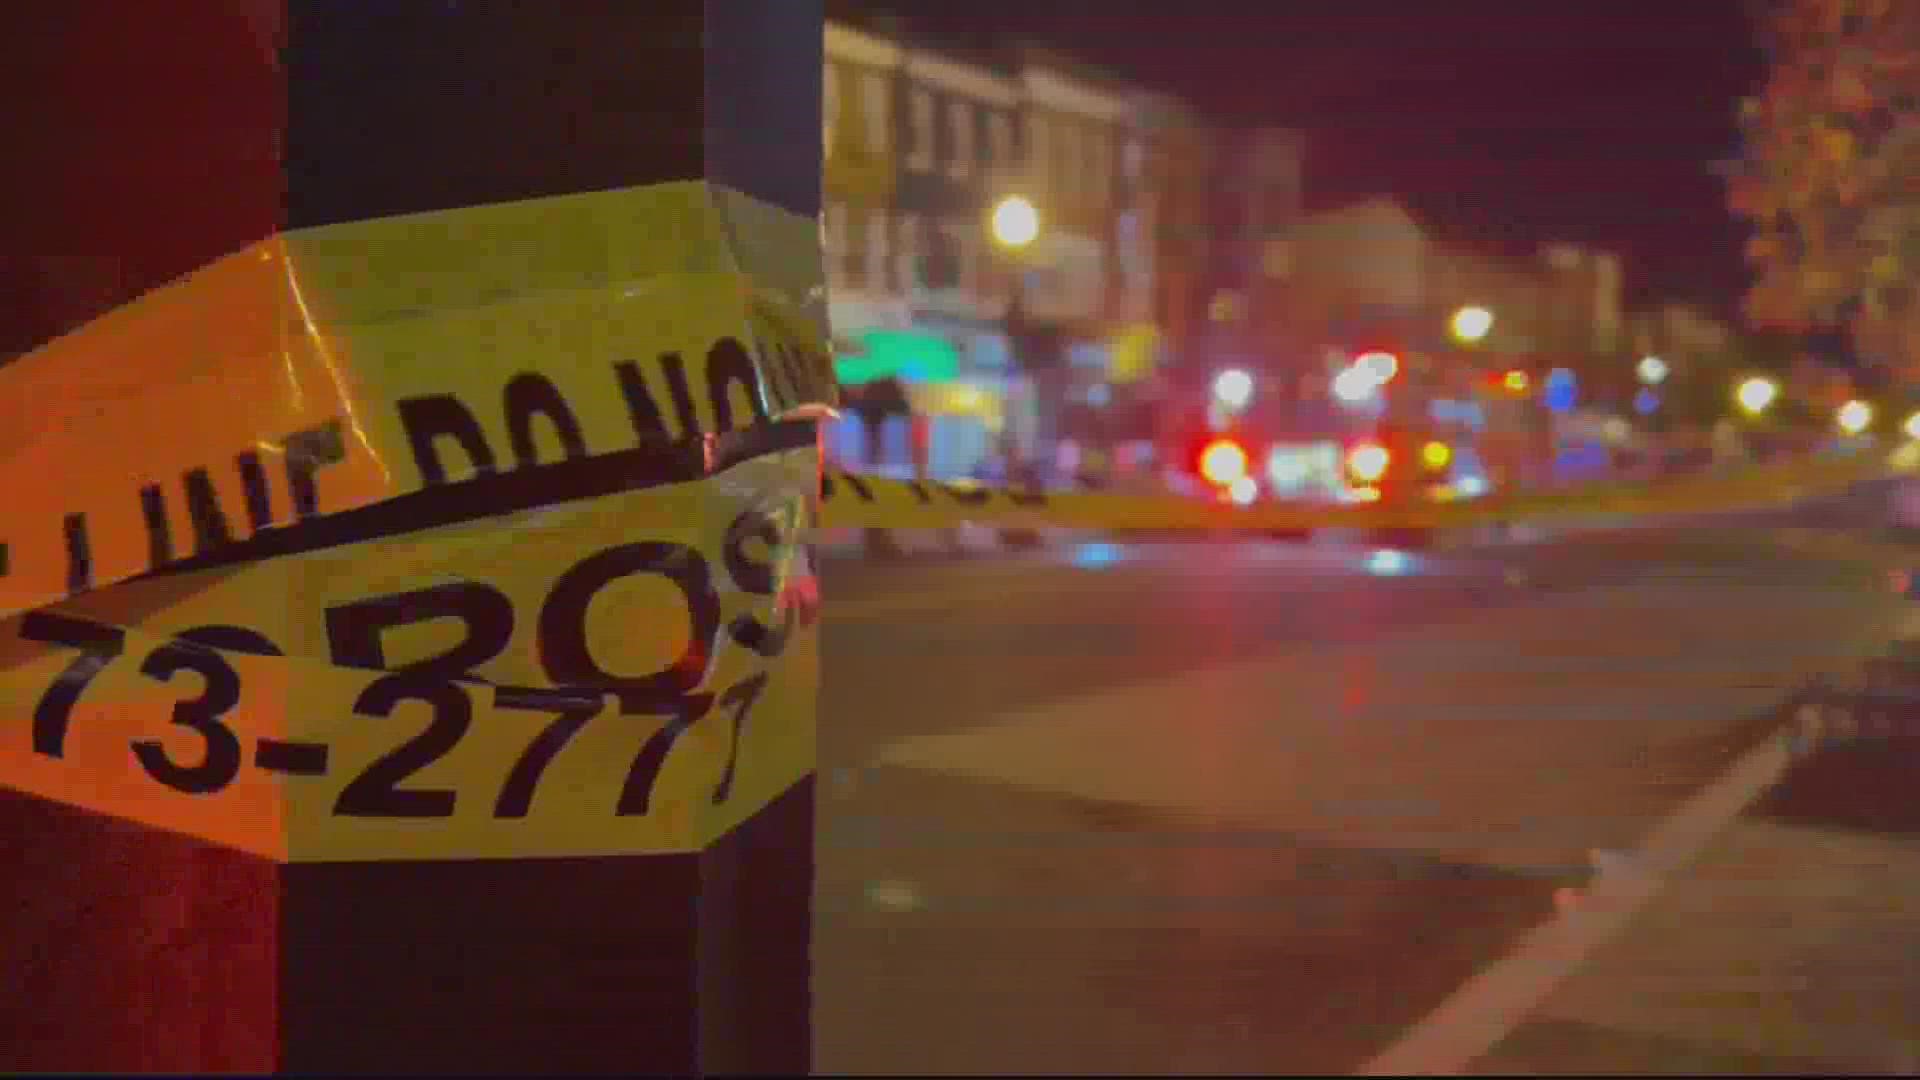 A woman who was found dead in Northeast D.C. Monday morning has been identified, the Metropolitan Police Department (MPD) said.